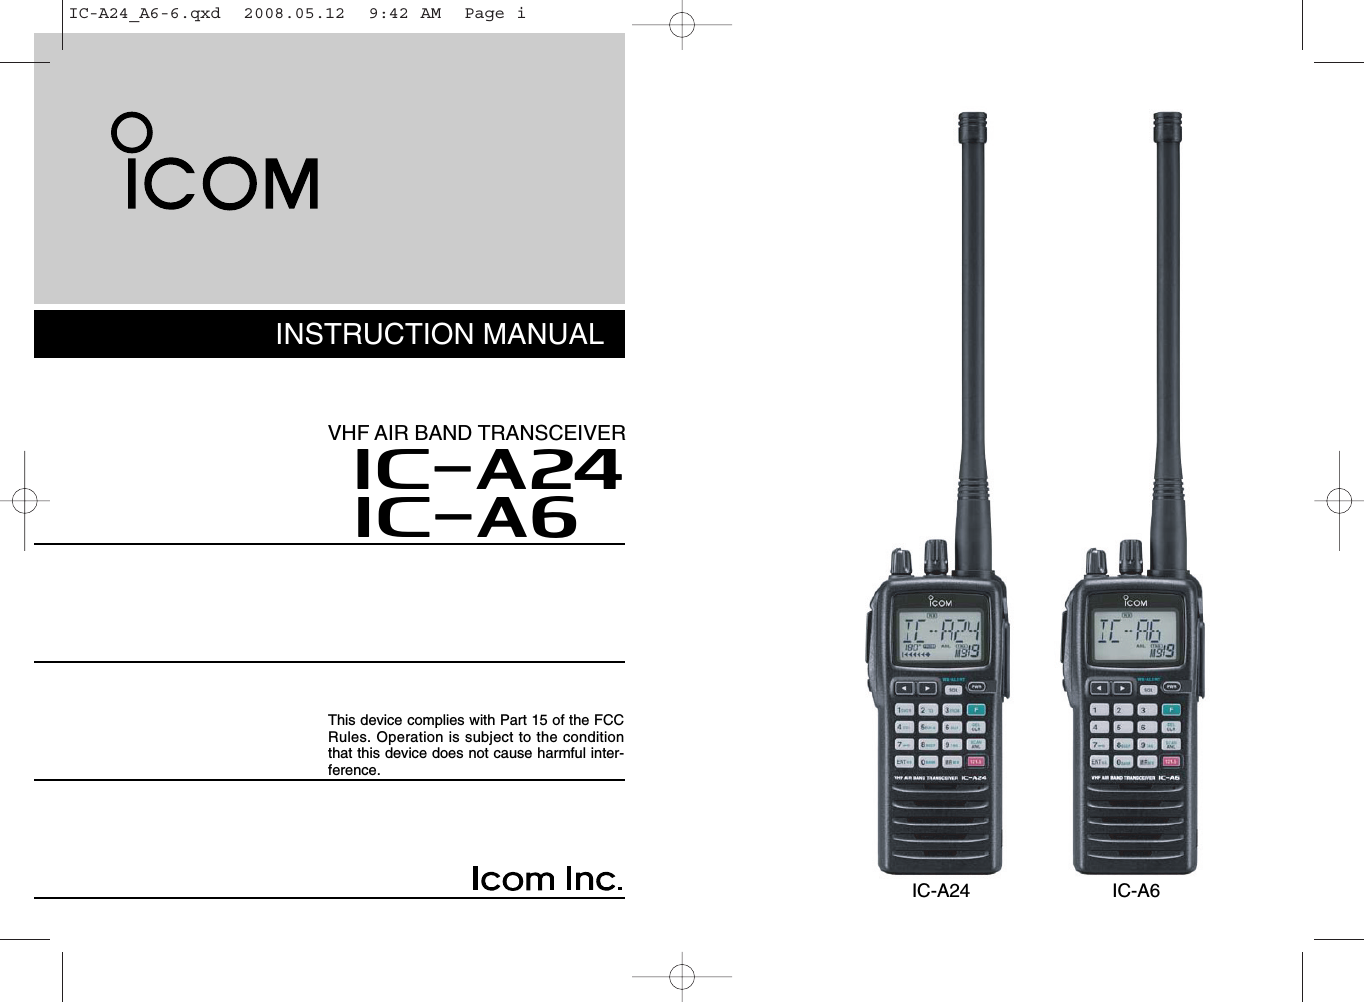 INSTRUCTION MANUALiA6iA24VHF AIR BAND TRANSCEIVERThis device complies with Part 15 of the FCCRules. Operation is subject to the conditionthat this device does not cause harmful inter-ference.IC-A24 IC-A6IC-A24_A6-6.qxd  2008.05.12  9:42 AM  Page i